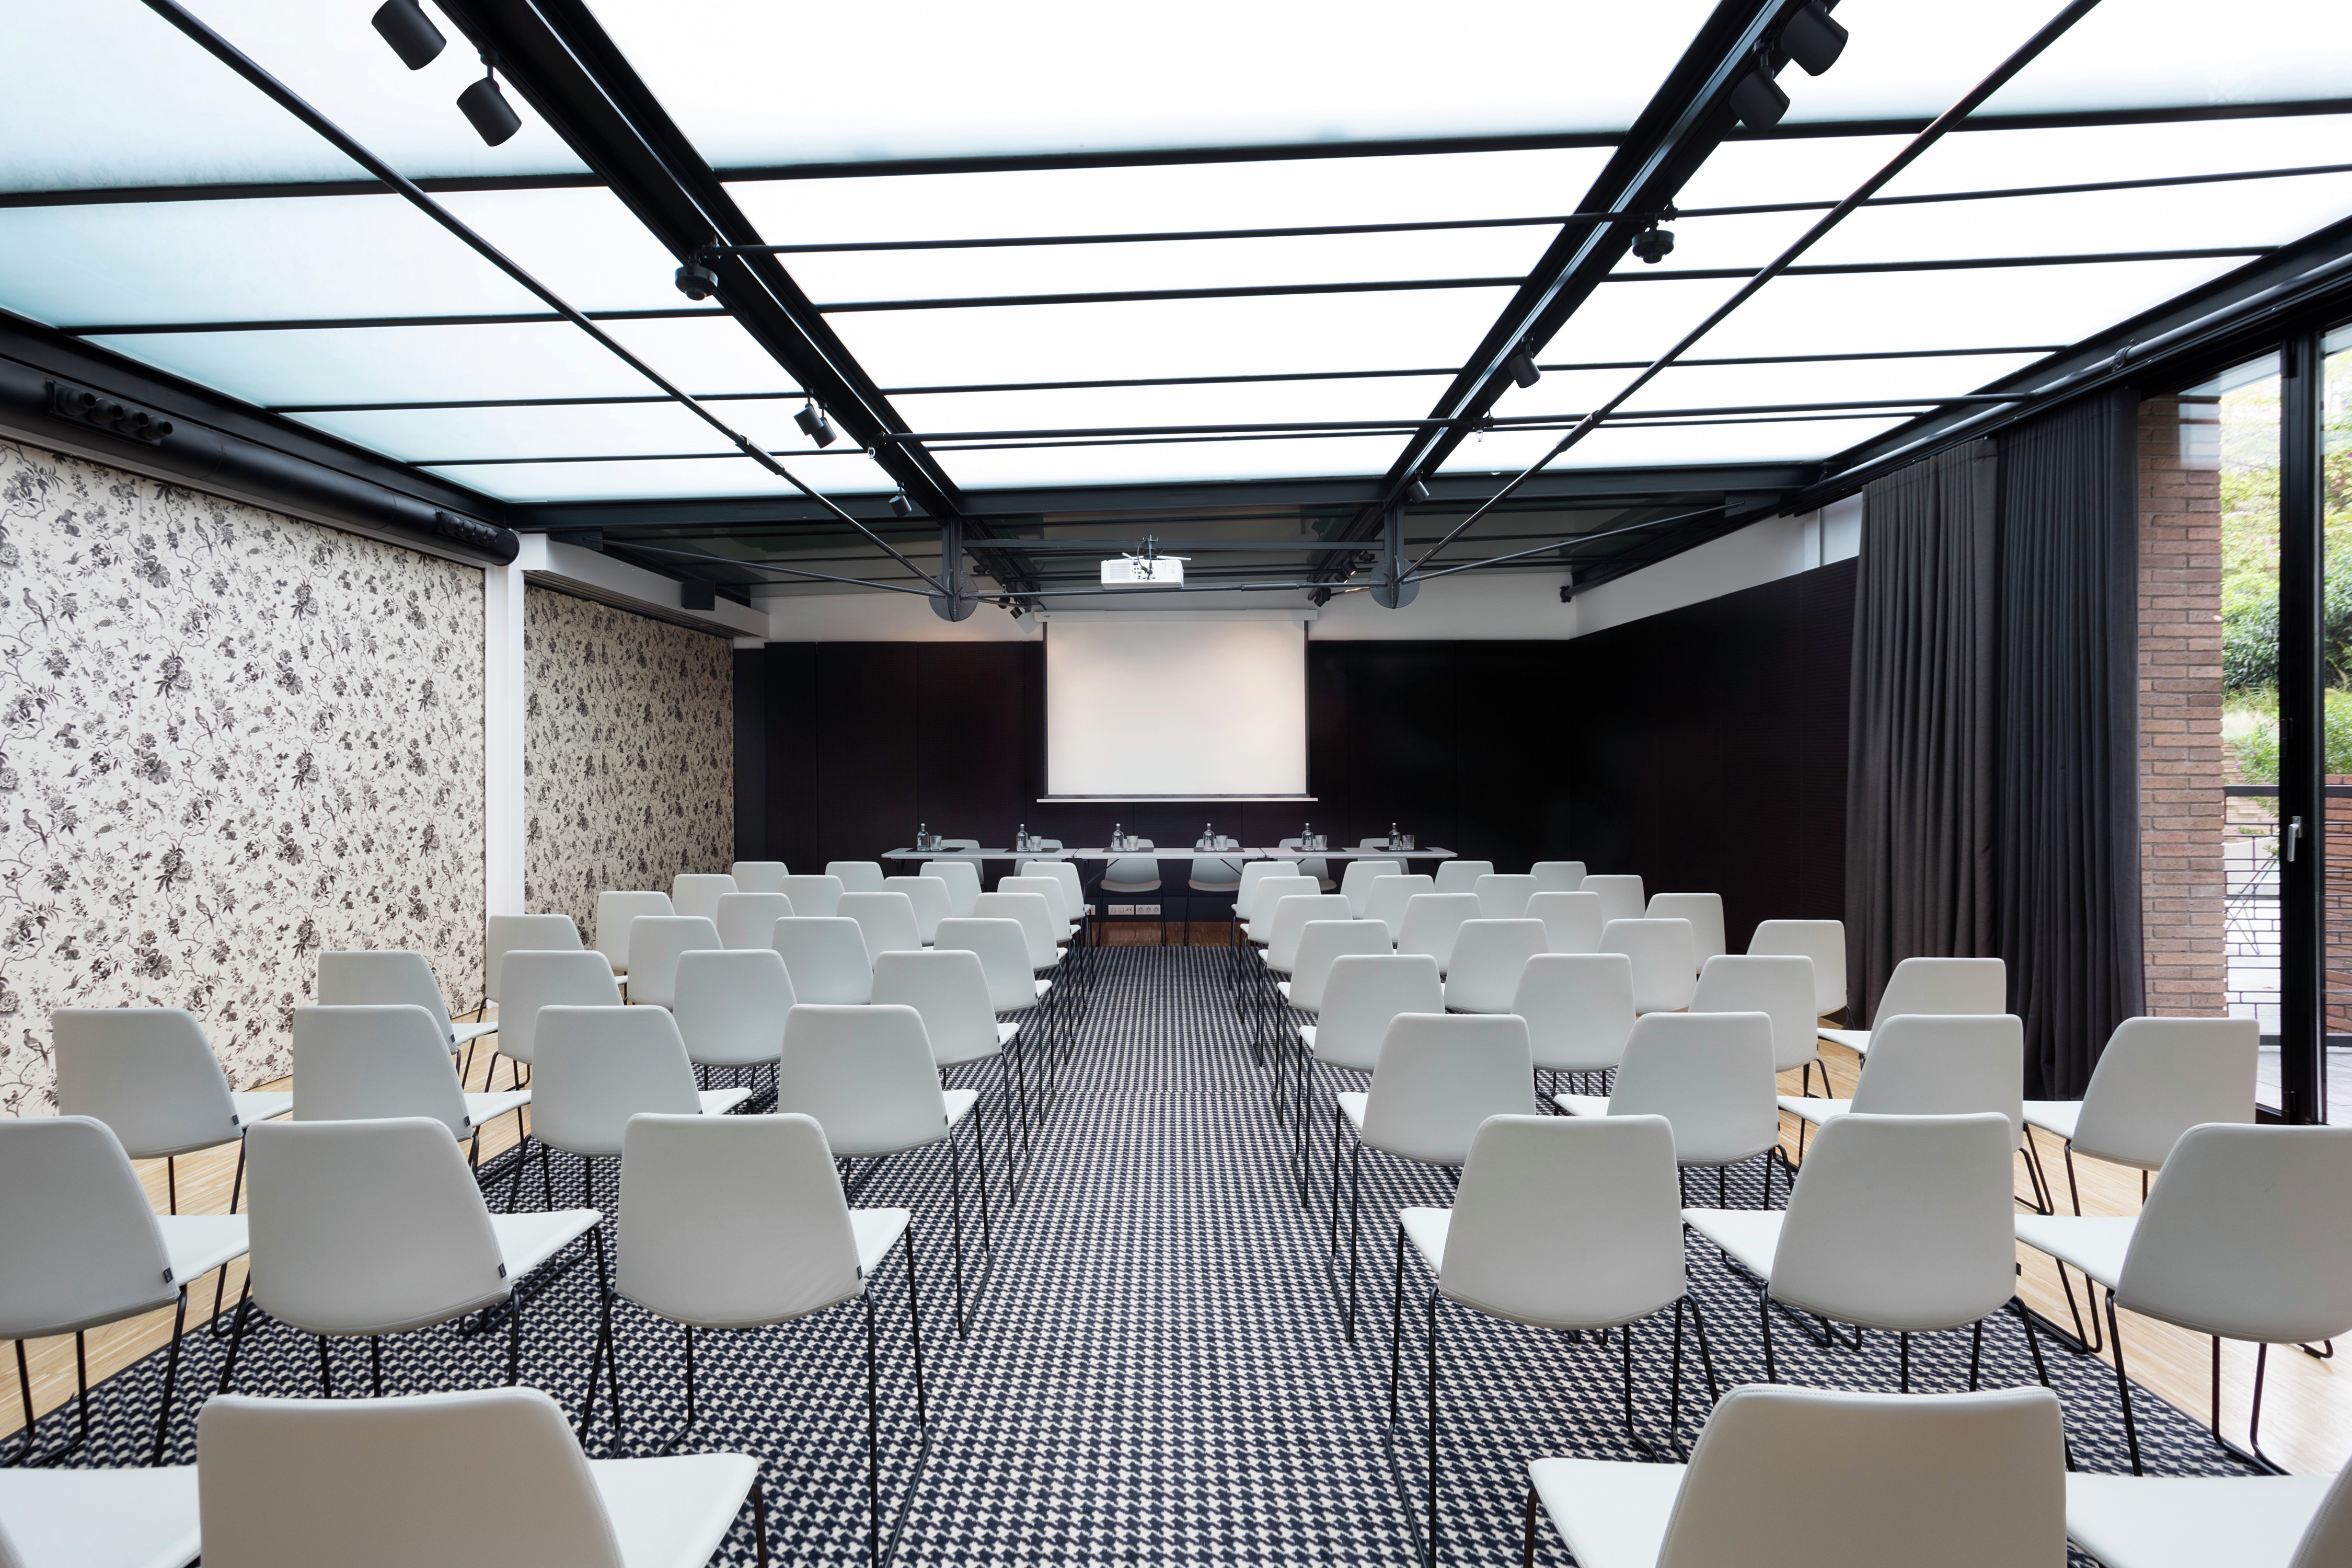 Alexandra Barcelona Curio Hotel Ballroom with Chairs and Projector Screen